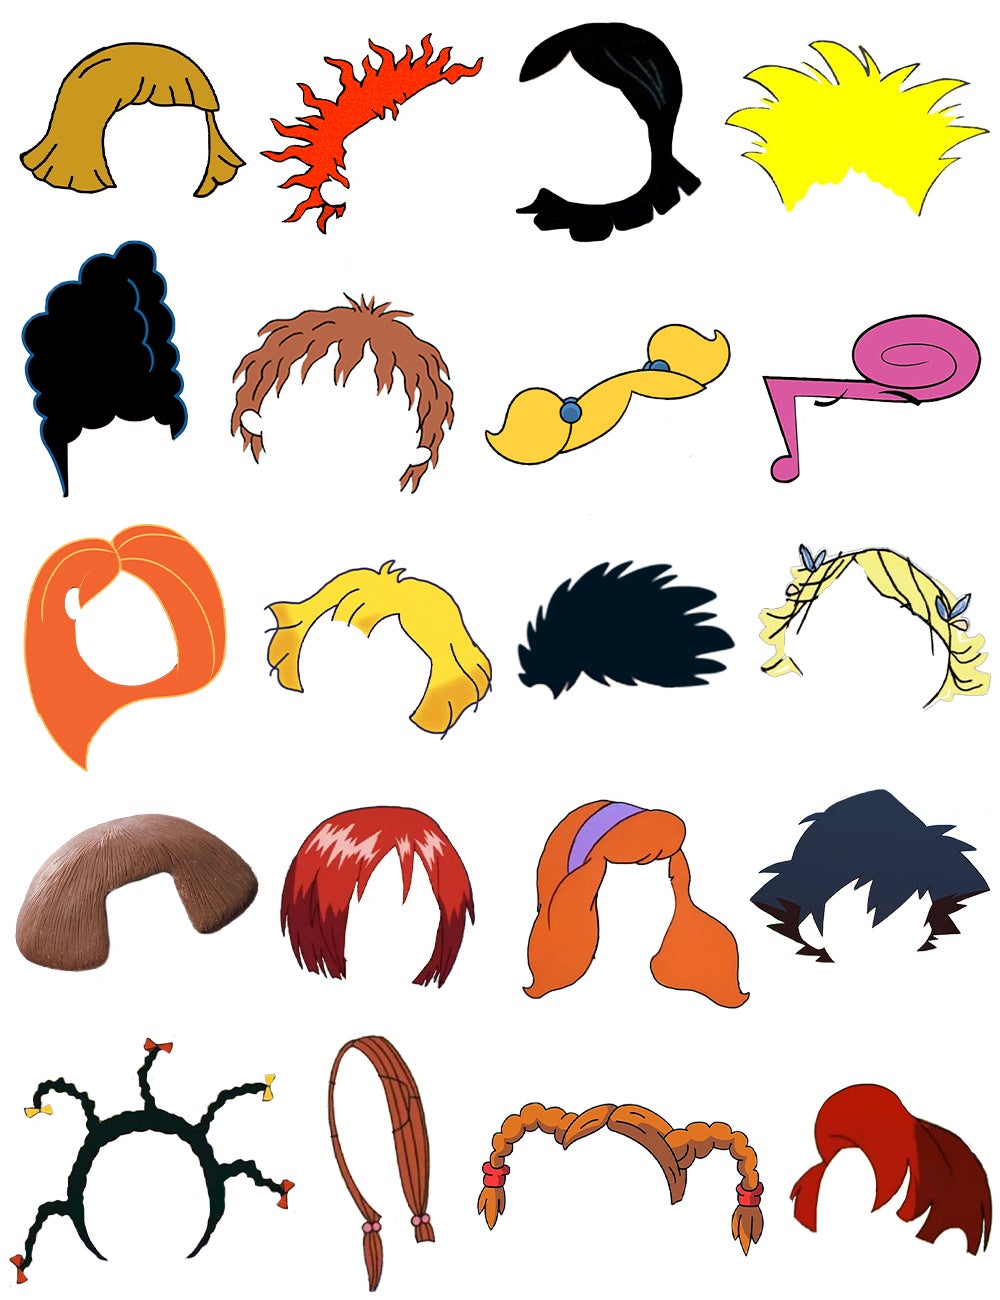 Can You Identify These Cartoon Characters From Just Their Hair?